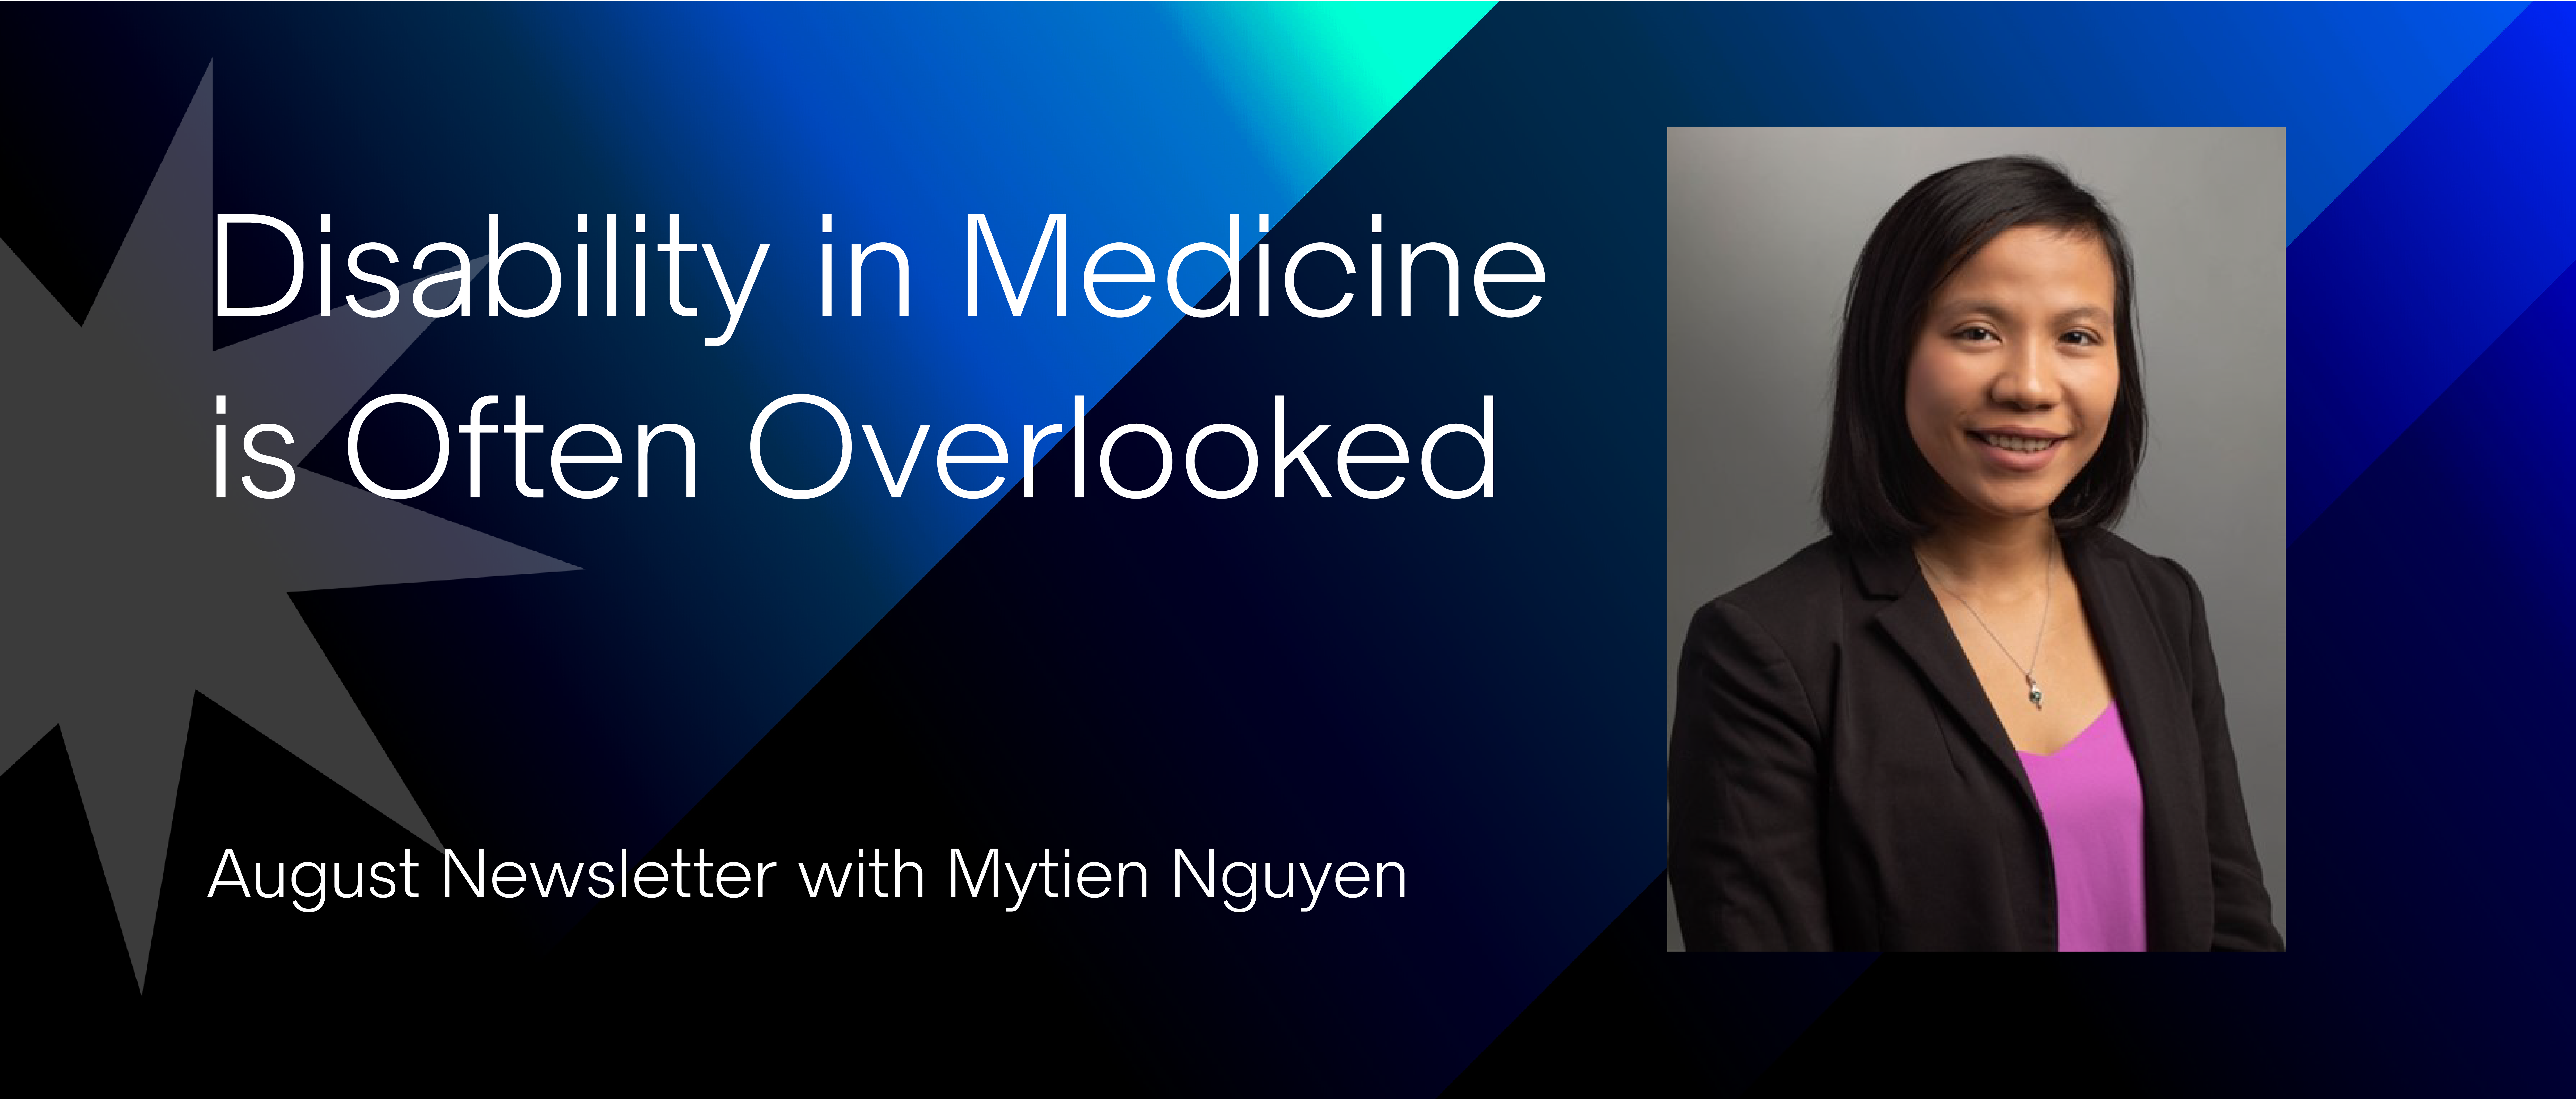 Disability in Medicine is Often Overlooked. August Newsletter with Mytien Nguyen